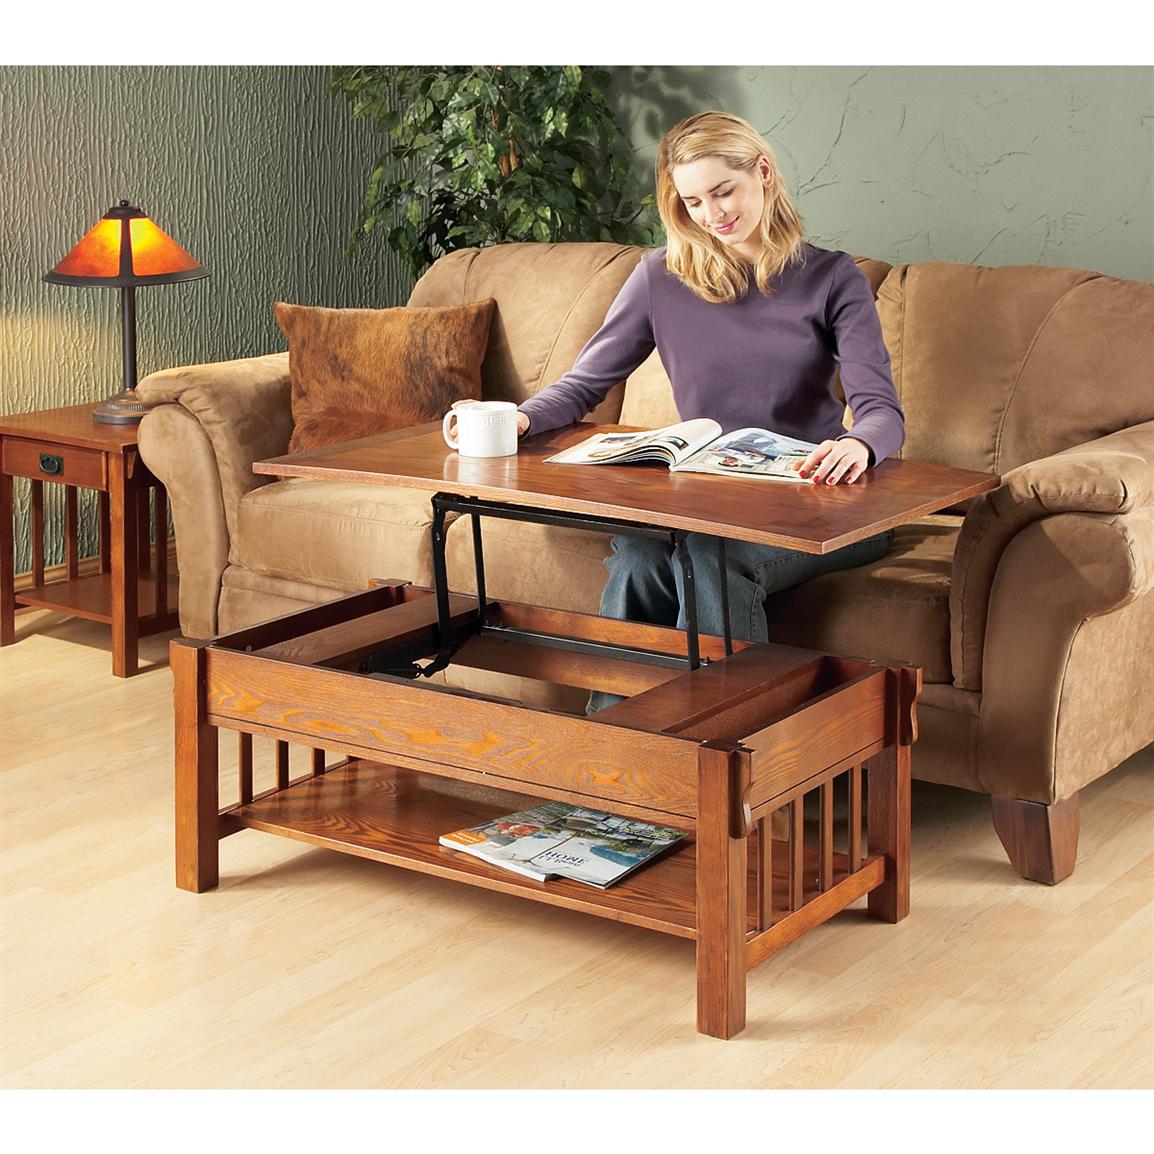 Mission-style Lift-top Coffee Table - 127270, Living Room at Sportsman